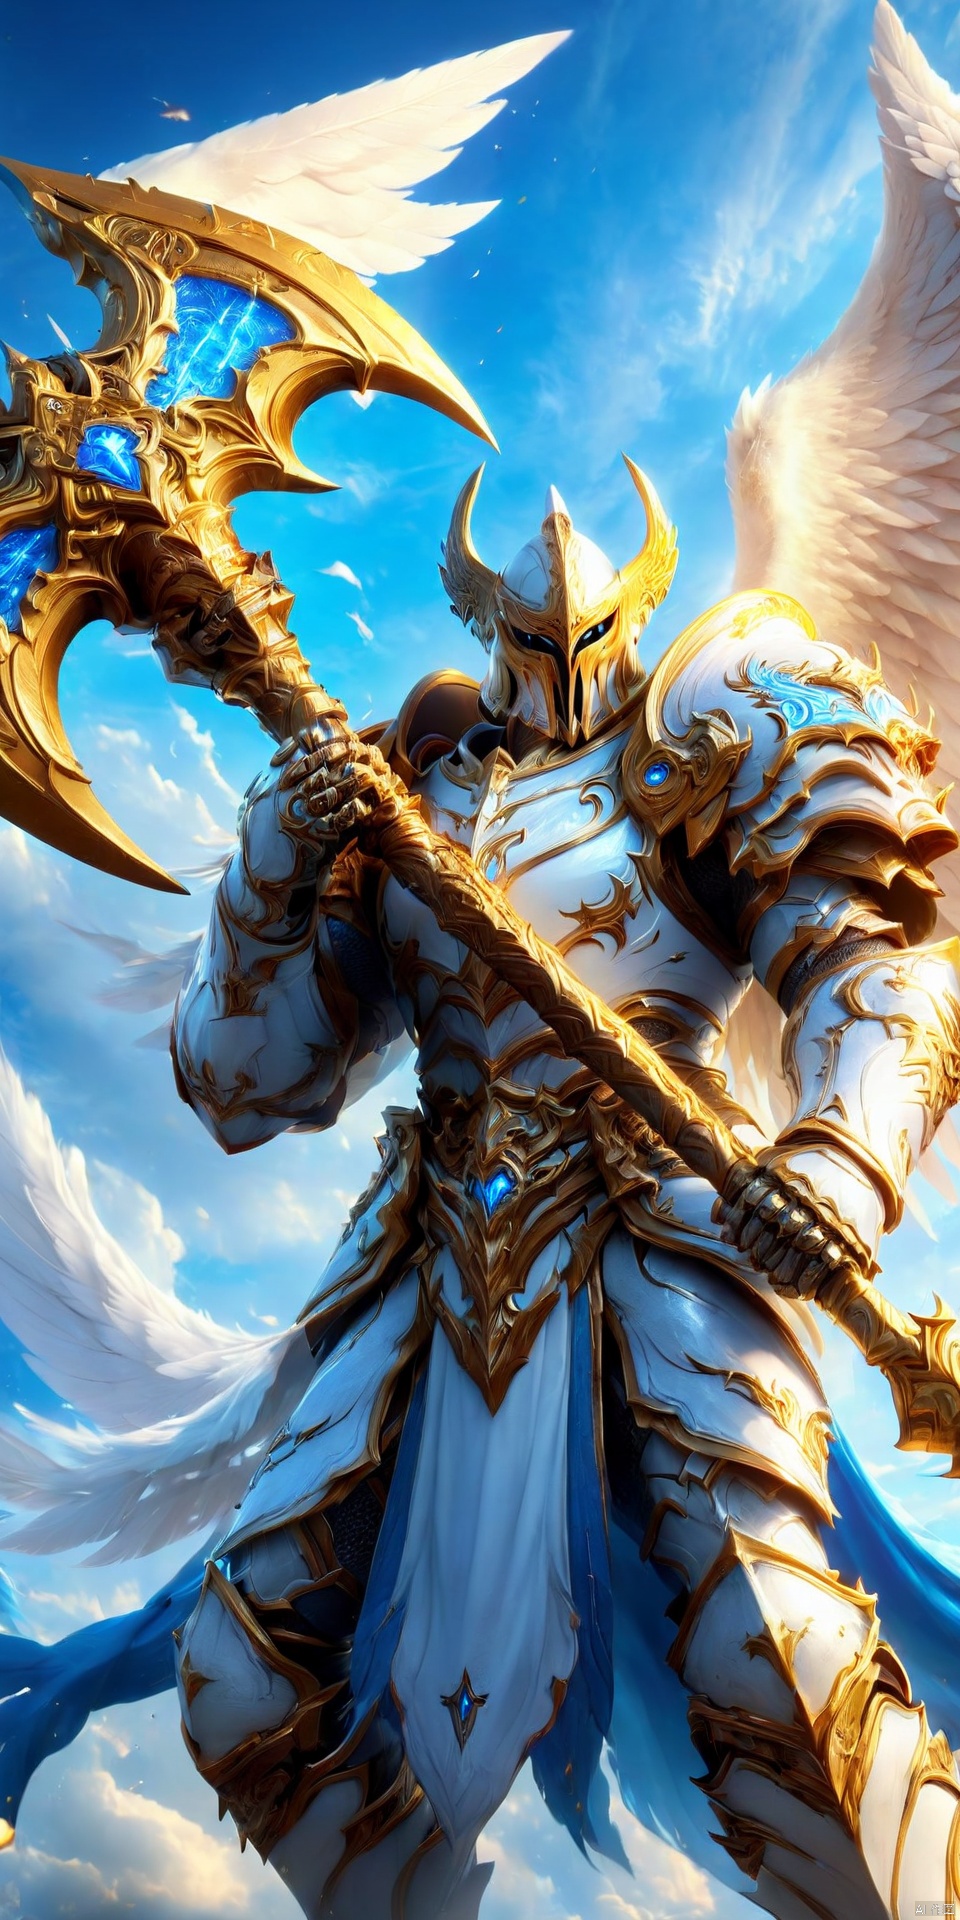 an detailed and realistic image of a fantasy game character wielding a giant golden and blue battleaxe, wearing white armor, angel wings 8K, HD, amazing quality, heaven in background, HD, masterpiece, best quality, hyper detailed, ultra detailed, realistic, Wielding a battleaxe